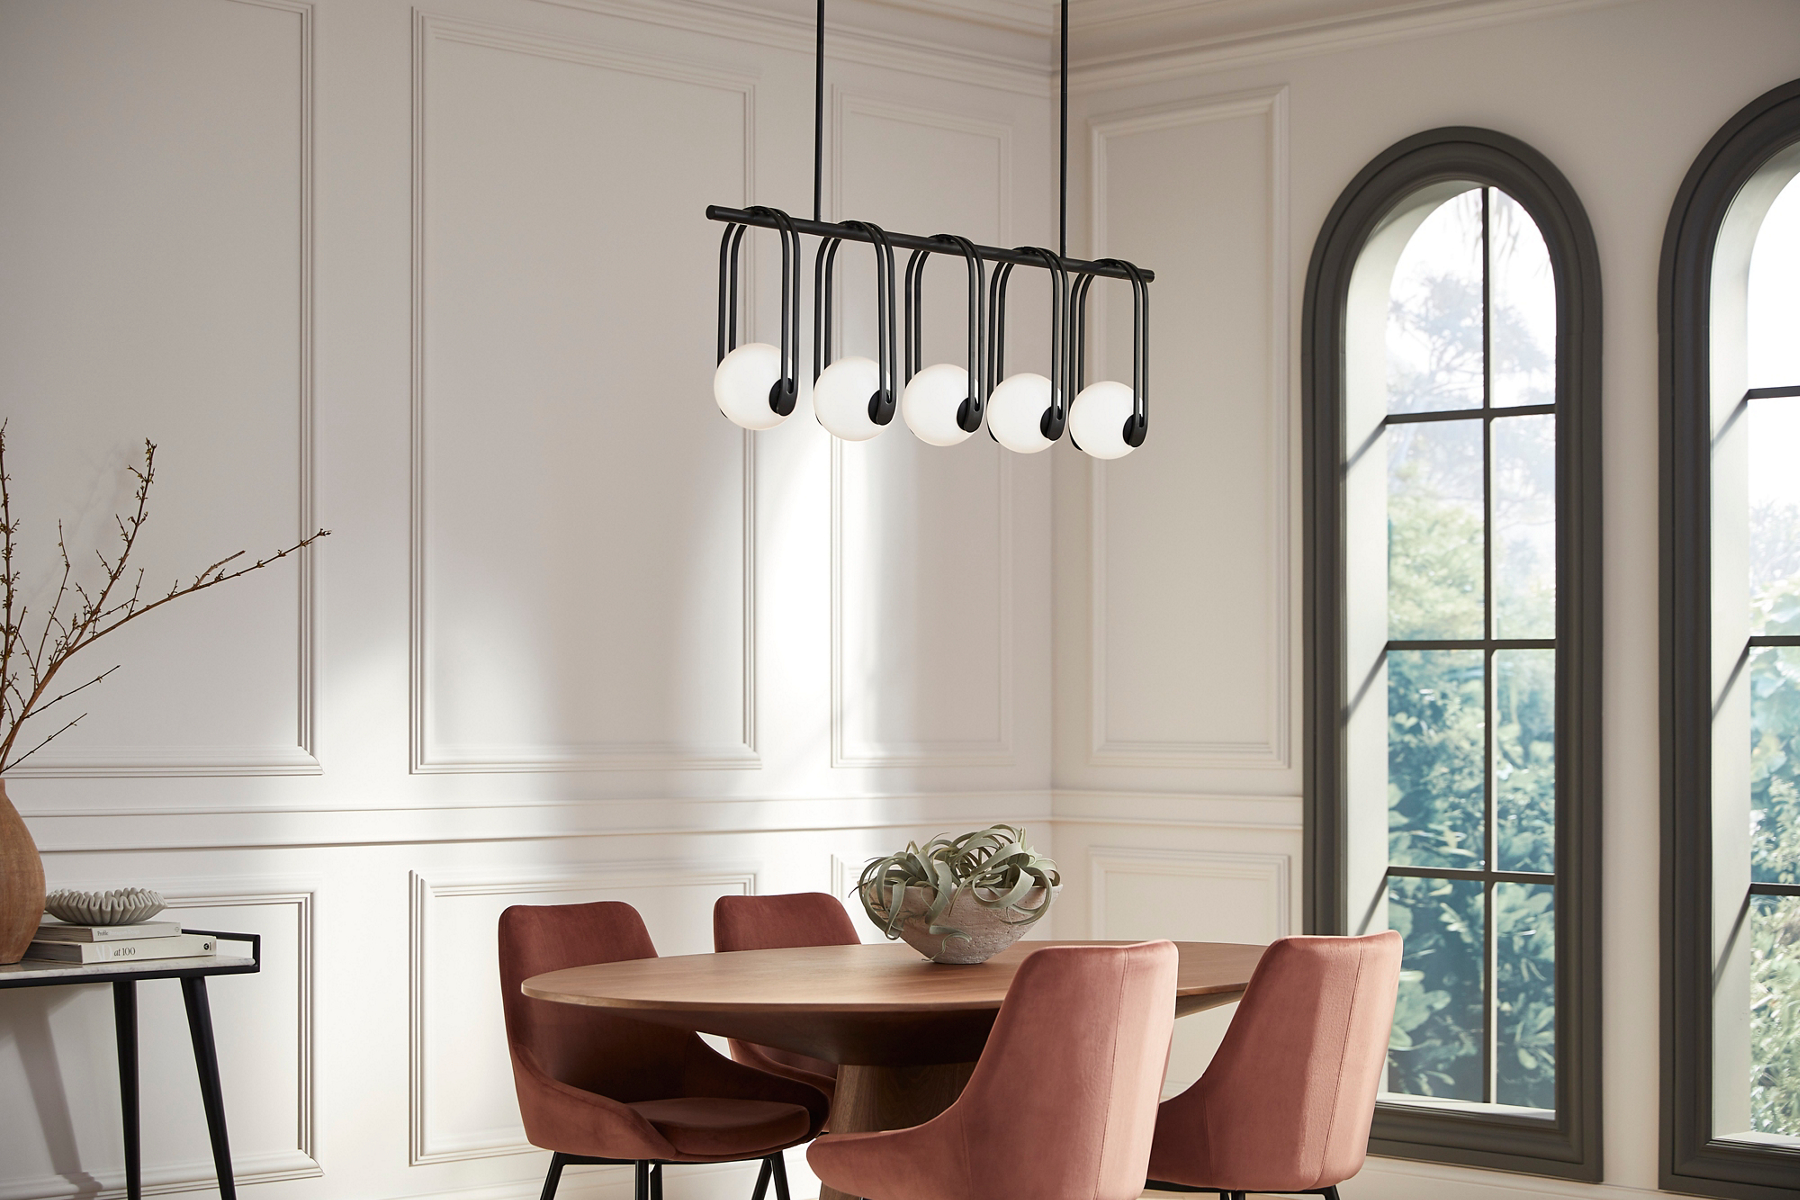 A KOHLER Kraga 5-light chandelier hangs above an oval dining table with a centerpiece of a large bowl of decorative spheres.